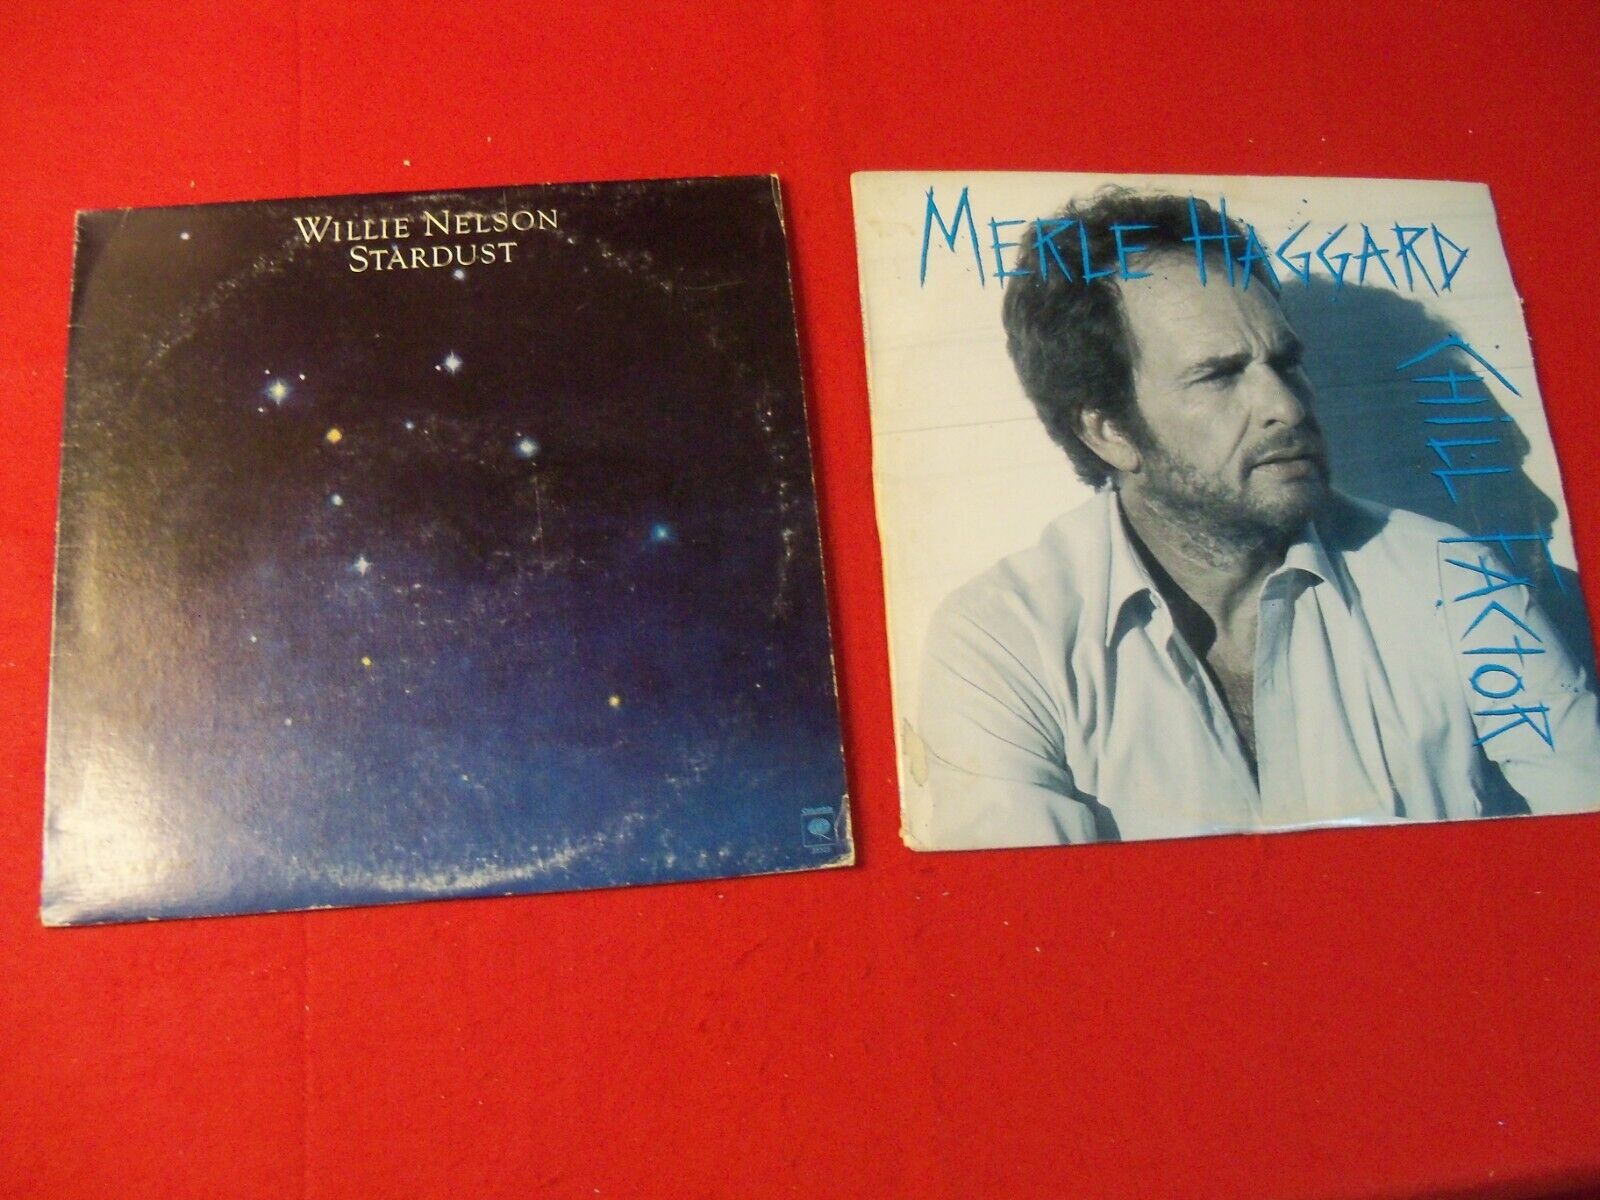 SET OF TWO COUNTRY LP'S WILLIE NELSON / MERLE HAGGARD ON CLASSIC VINTAGE VINYL!